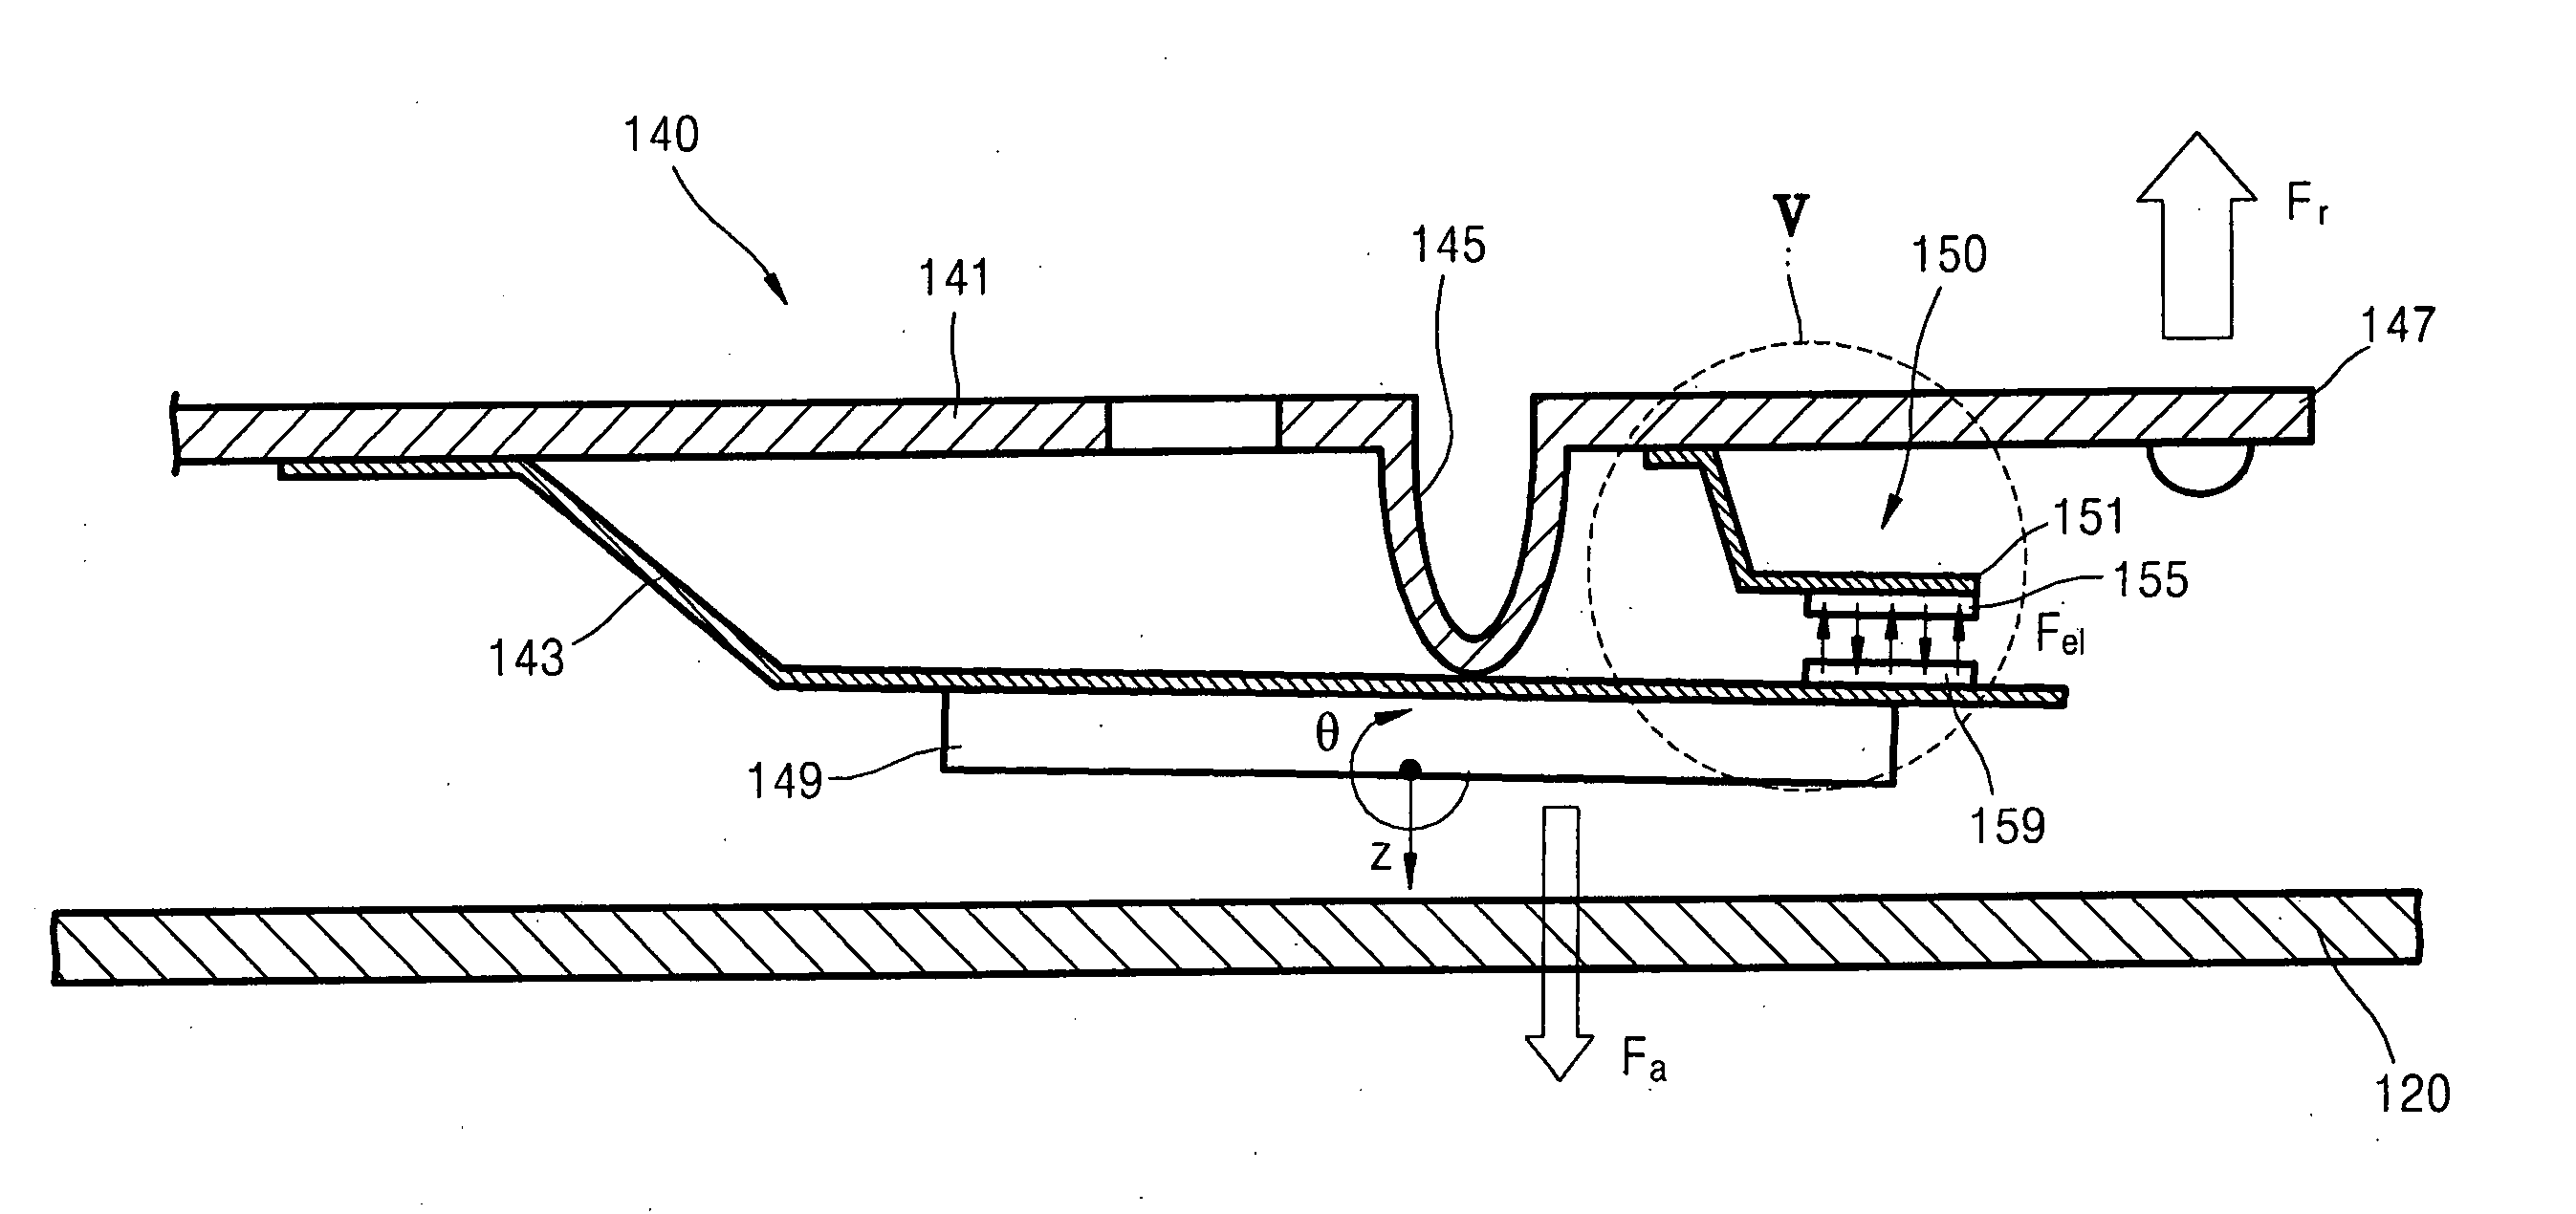 Hard disk drive, suspension assembly of actuator of hard disk drive, and method of operation of hard disk drive